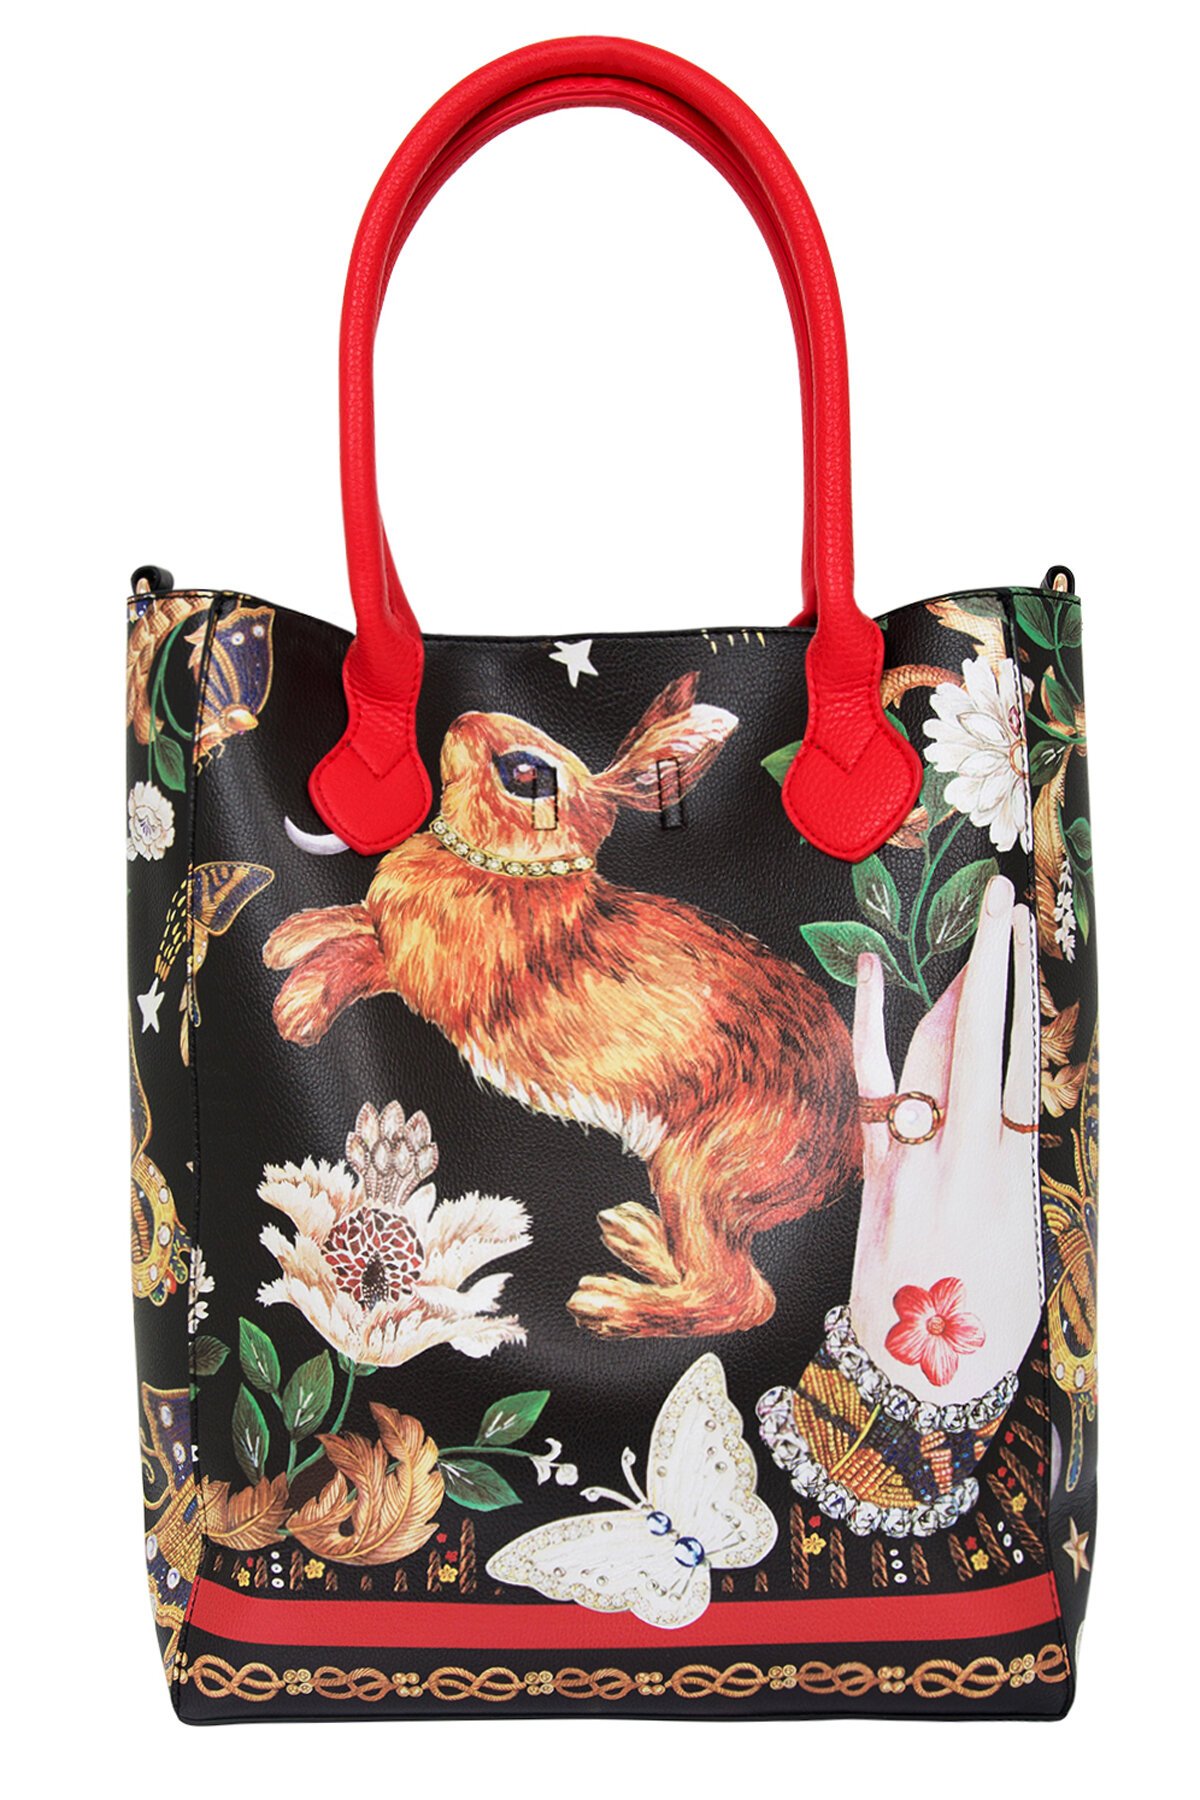 FROM HARE TO THERE Tote - Trelise Cooper-Home and Gifts : Trelise Cooper Online - TOTES GOOD FOR ...